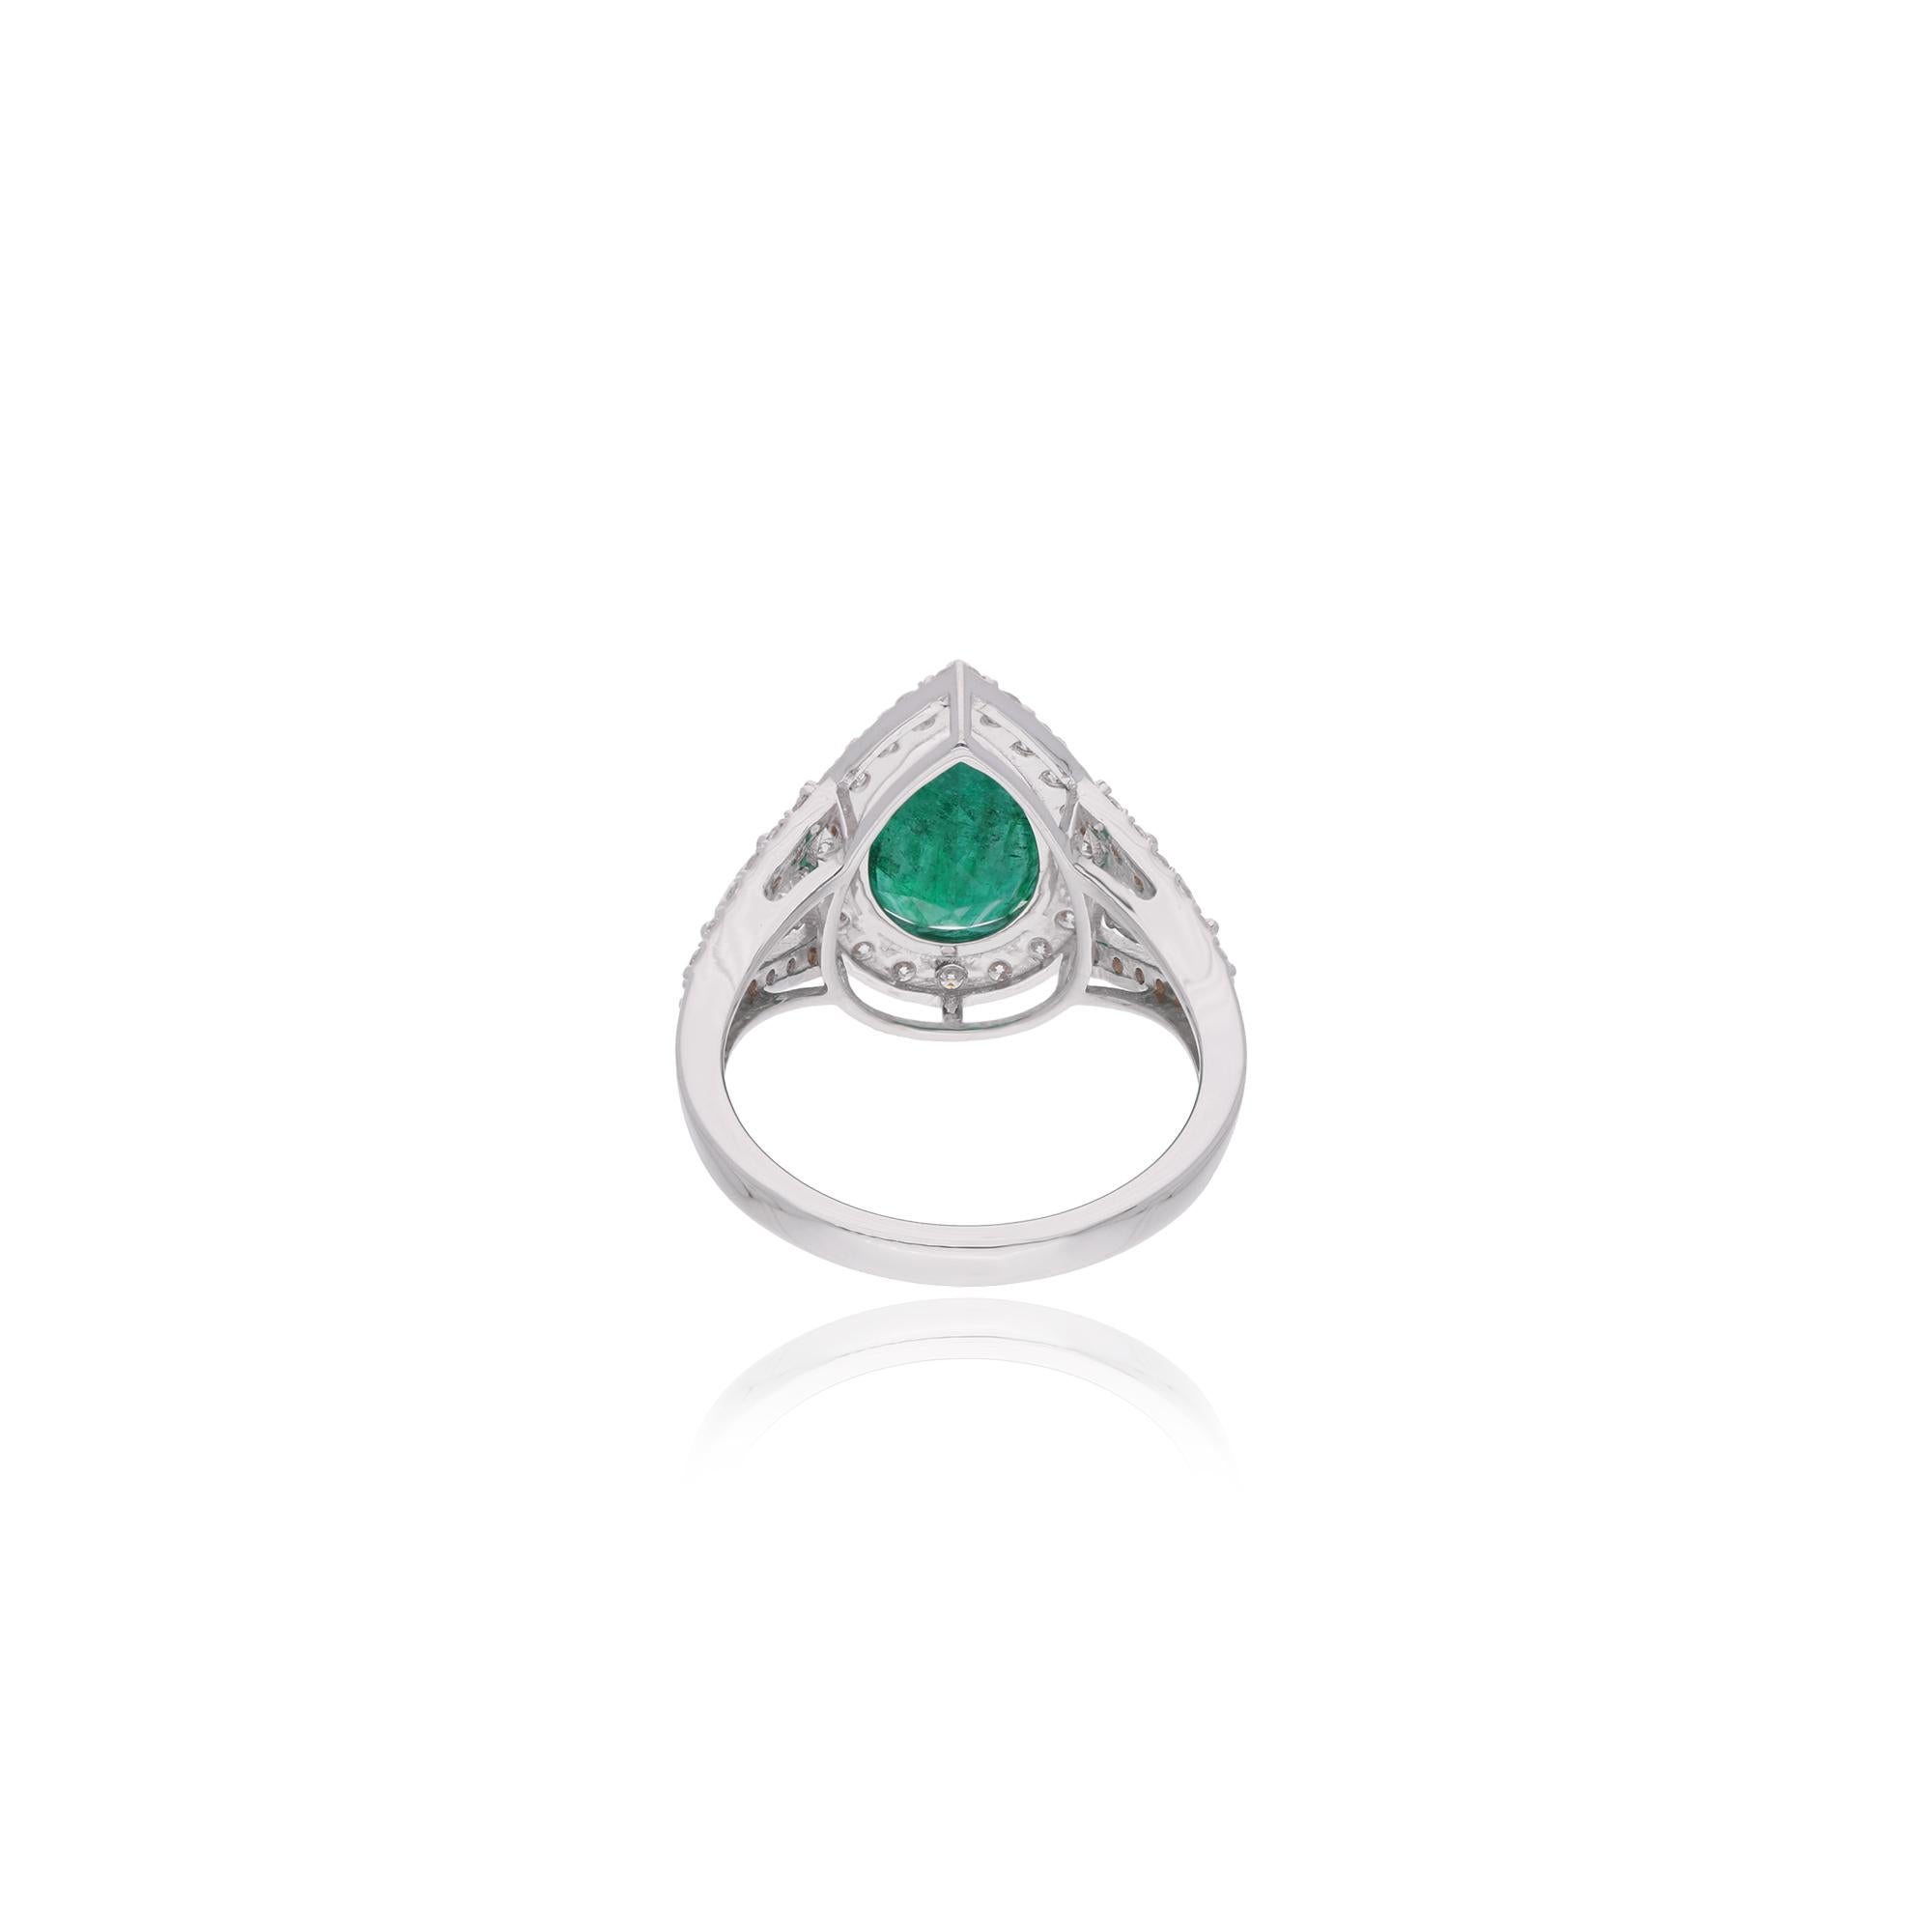 Nestled alongside the diamond is a green emerald, representing the birthstone of May. The emerald's color is further enhanced by the white gold band, creating a stunning contrast that is sure to turn heads. This ring is available in 10k/14k/18k,